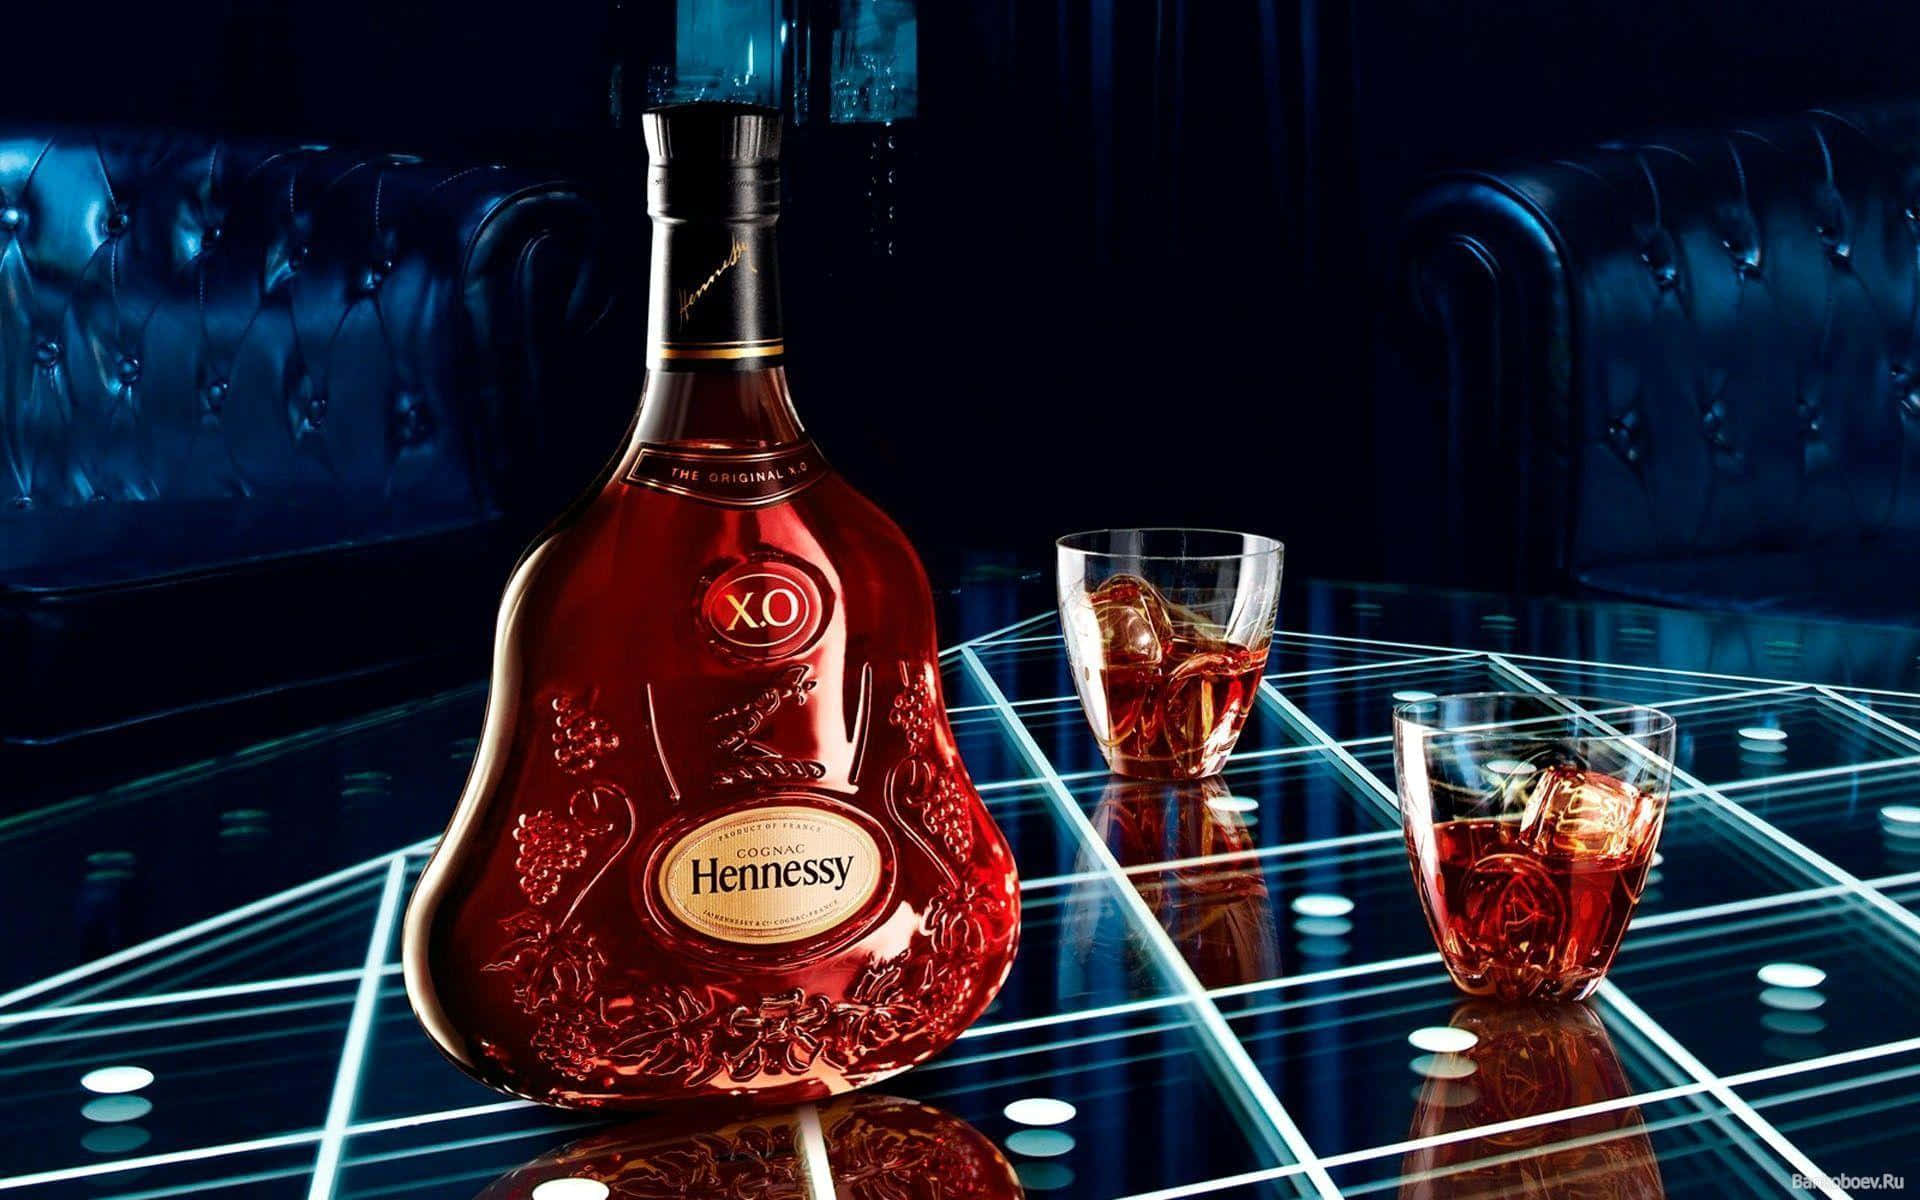 "The perfect Hennessy for any occasion" Wallpaper